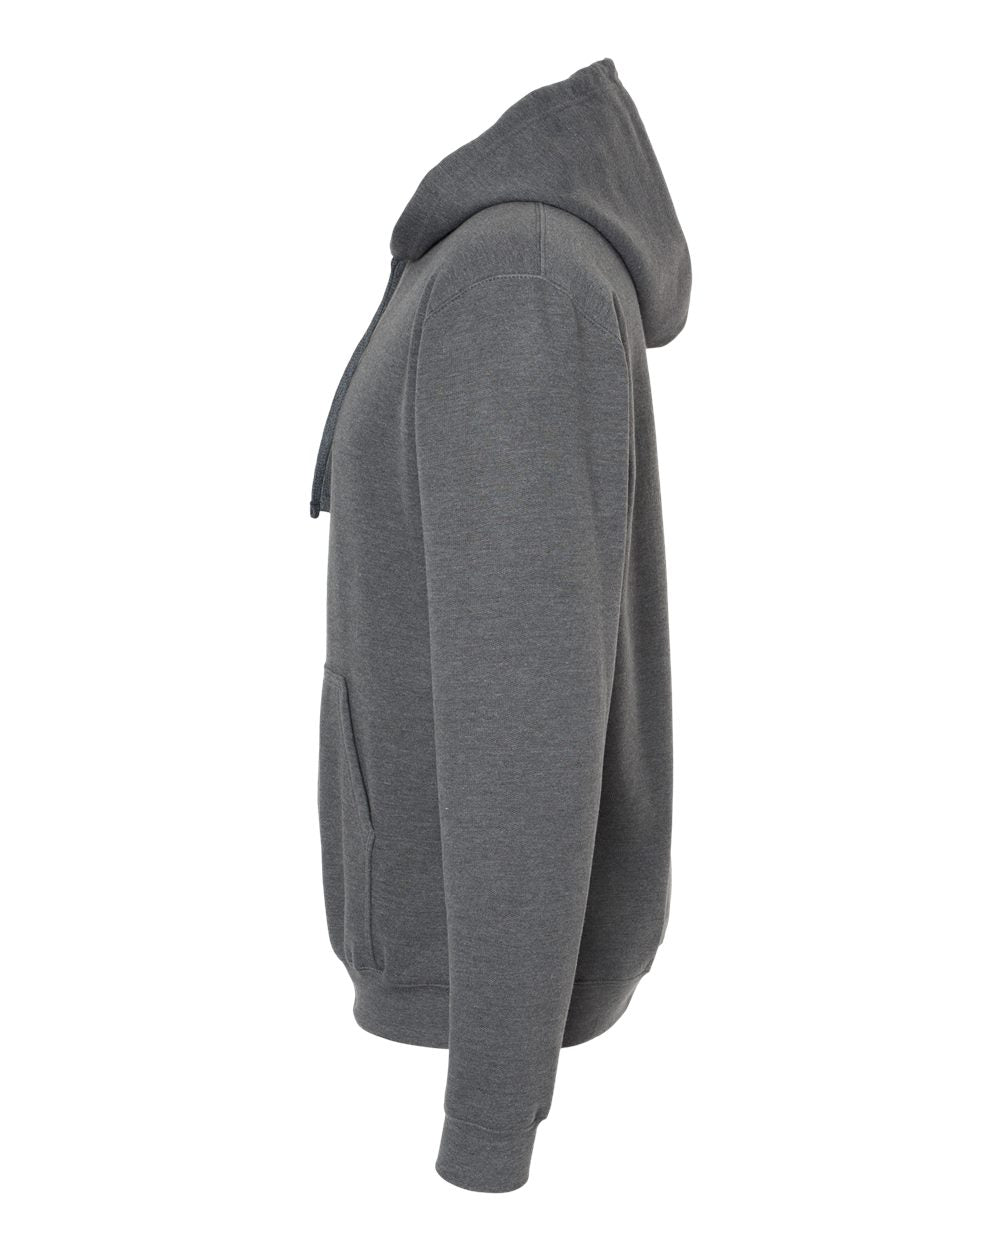 M&O Unisex Pullover Hoodie 3320 #color_Heather Charcoal